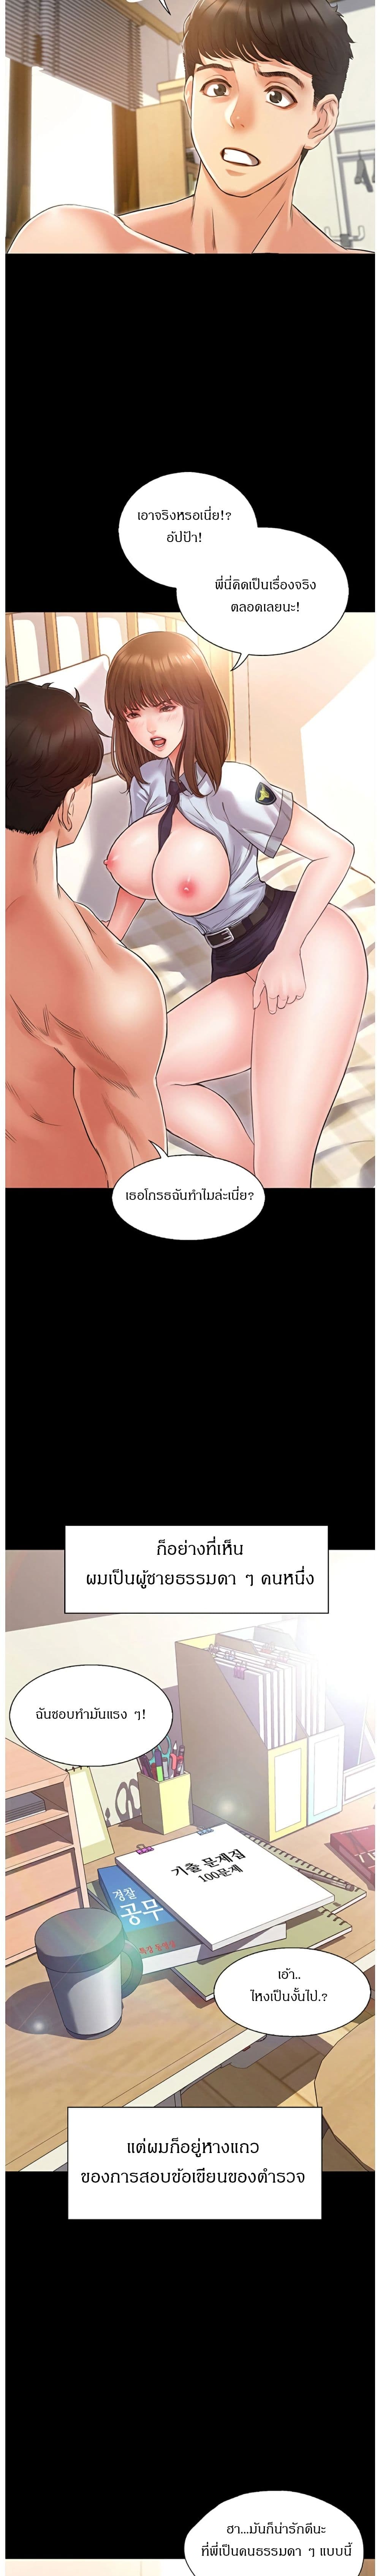 without you แปล ไทย full